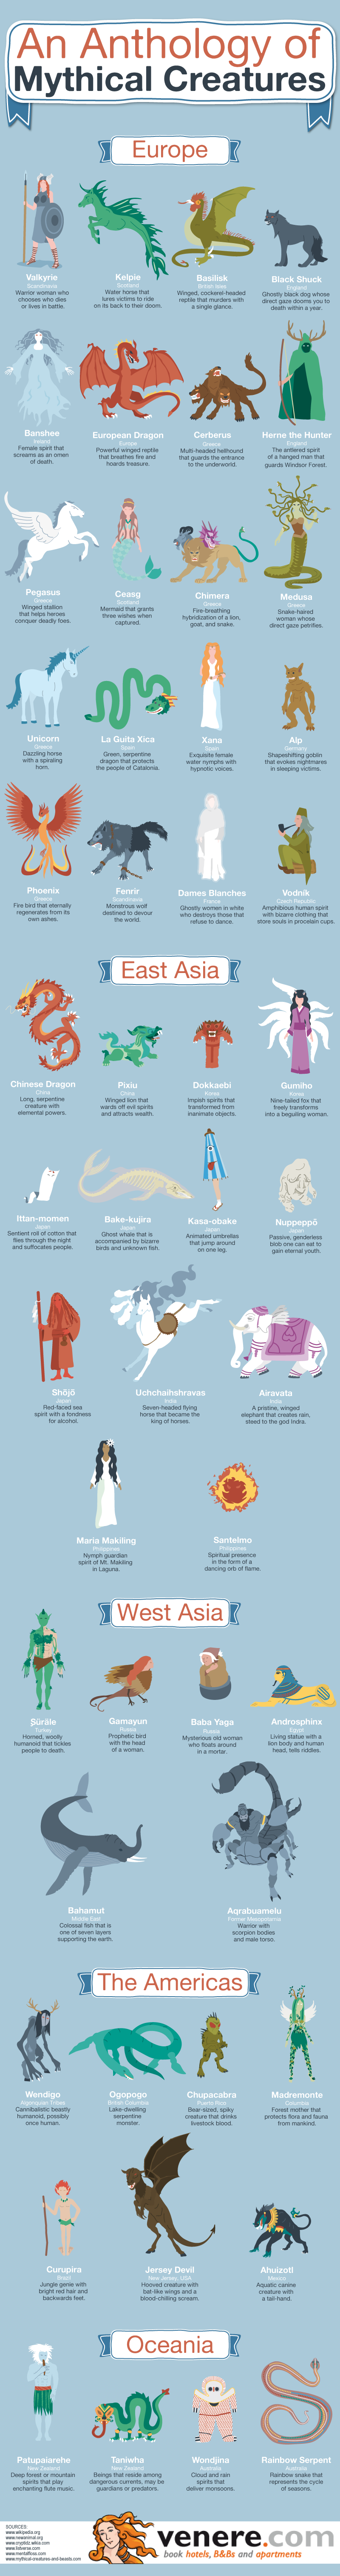 An Anthology of Mythical Creatures [Infographic]